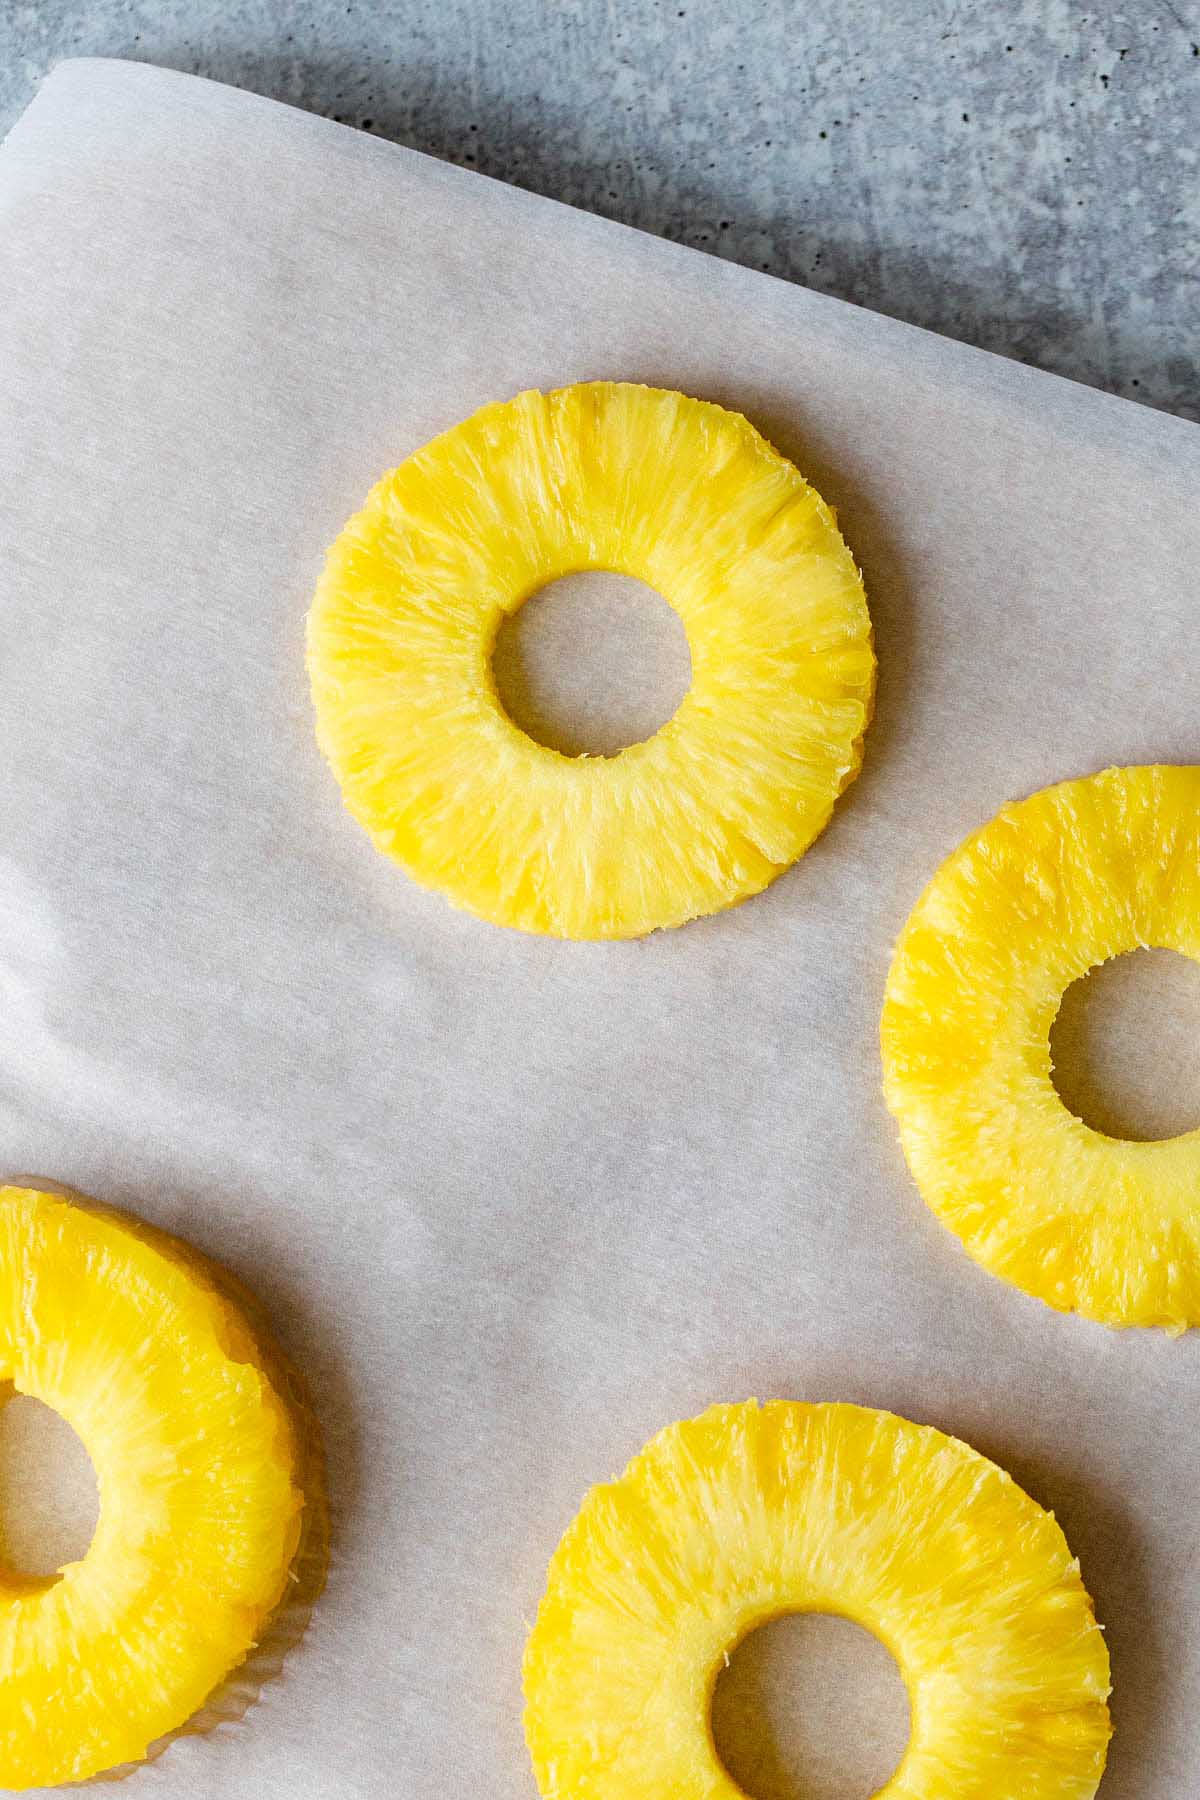 Pineapple rings on parchment paper.